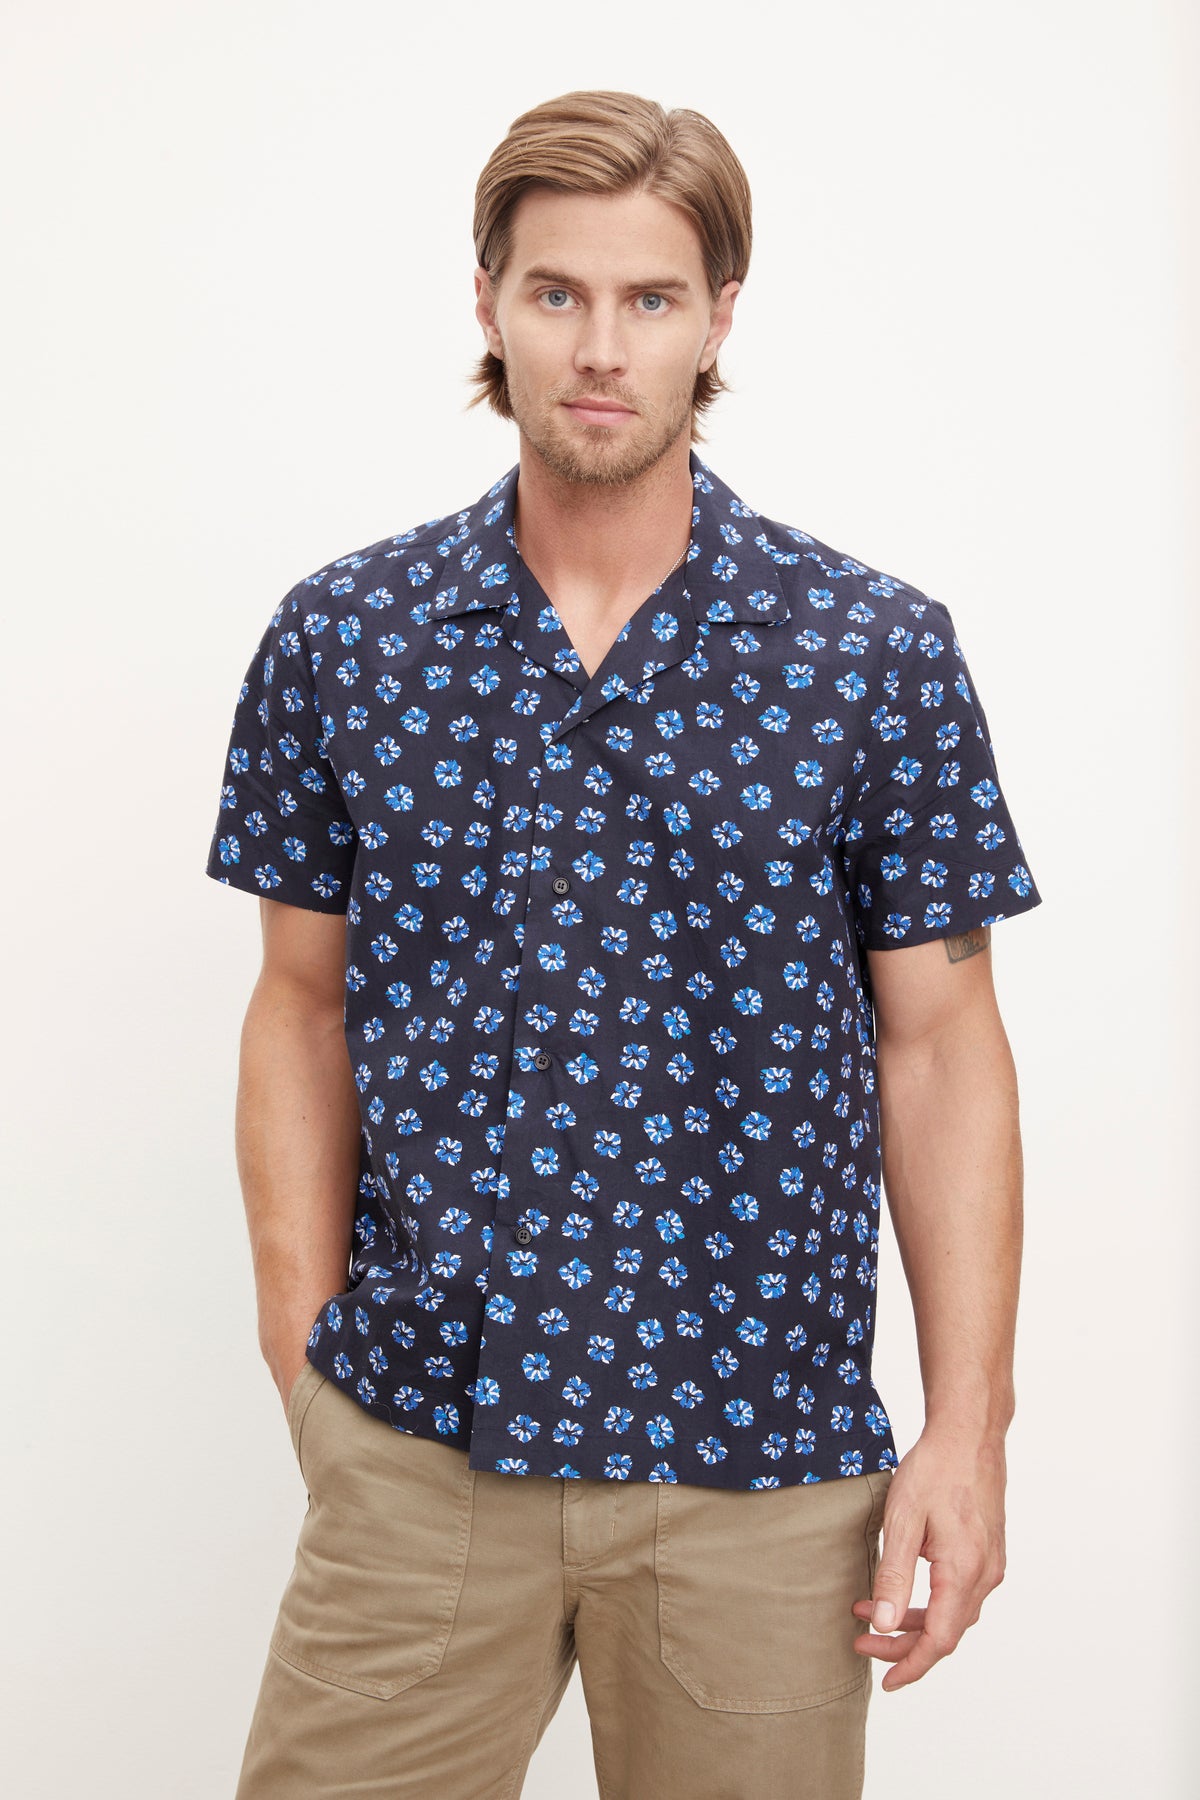 Man wearing a short-sleeved patterned Iggy button-up shirt by Velvet by Graham & Spencer and khaki pants standing against a plain background.-36009928229057